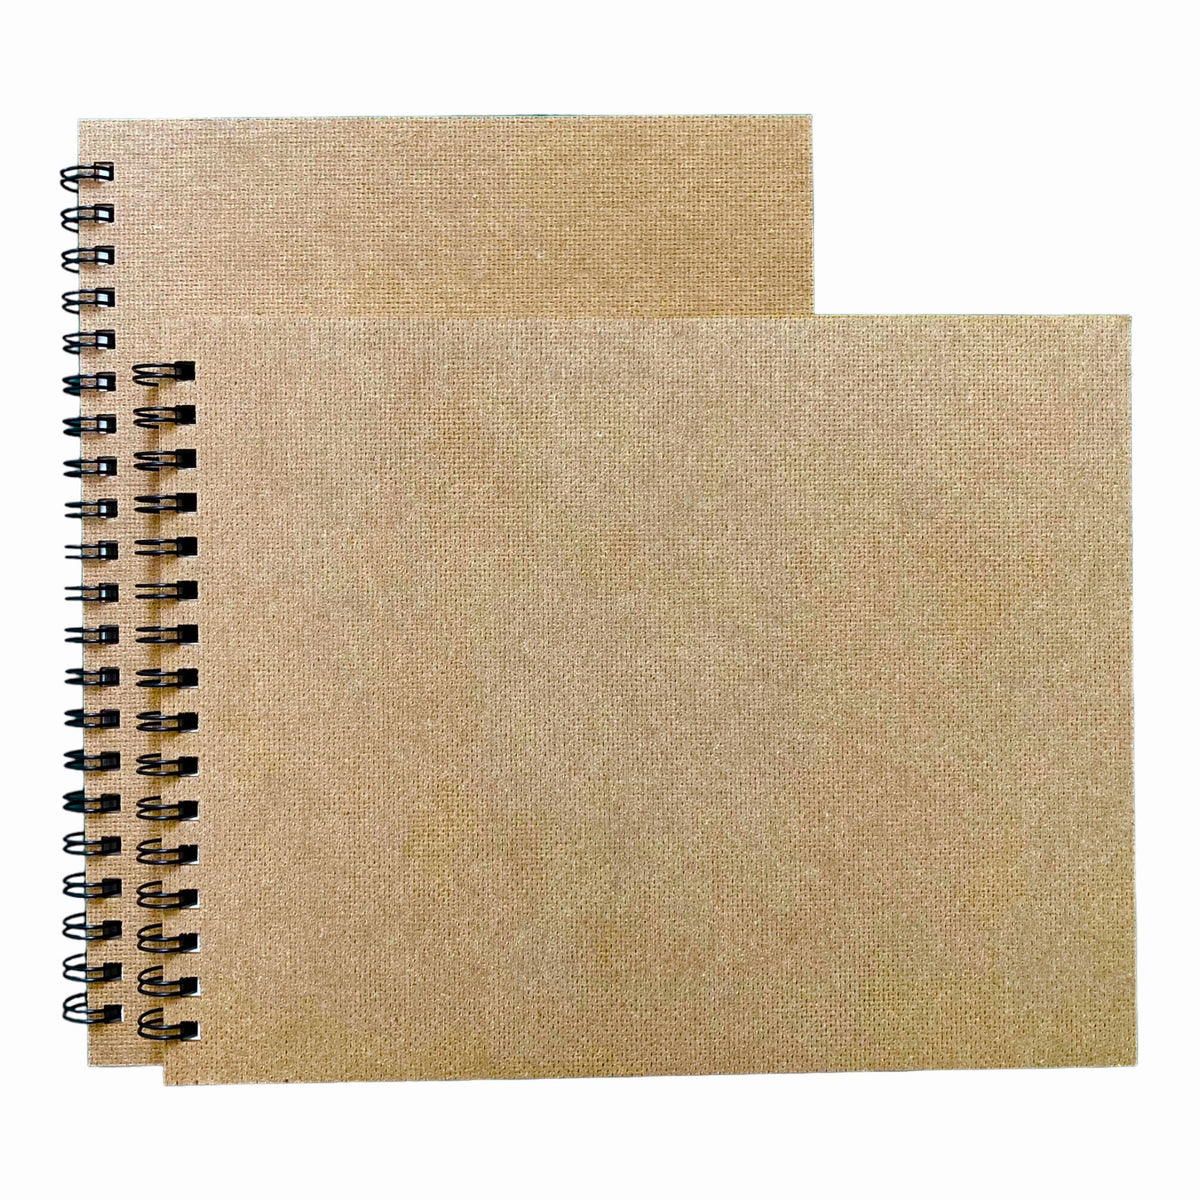 Recycled Spiral Bound Sketchbooks - U.S. dimensions (pack of 3)